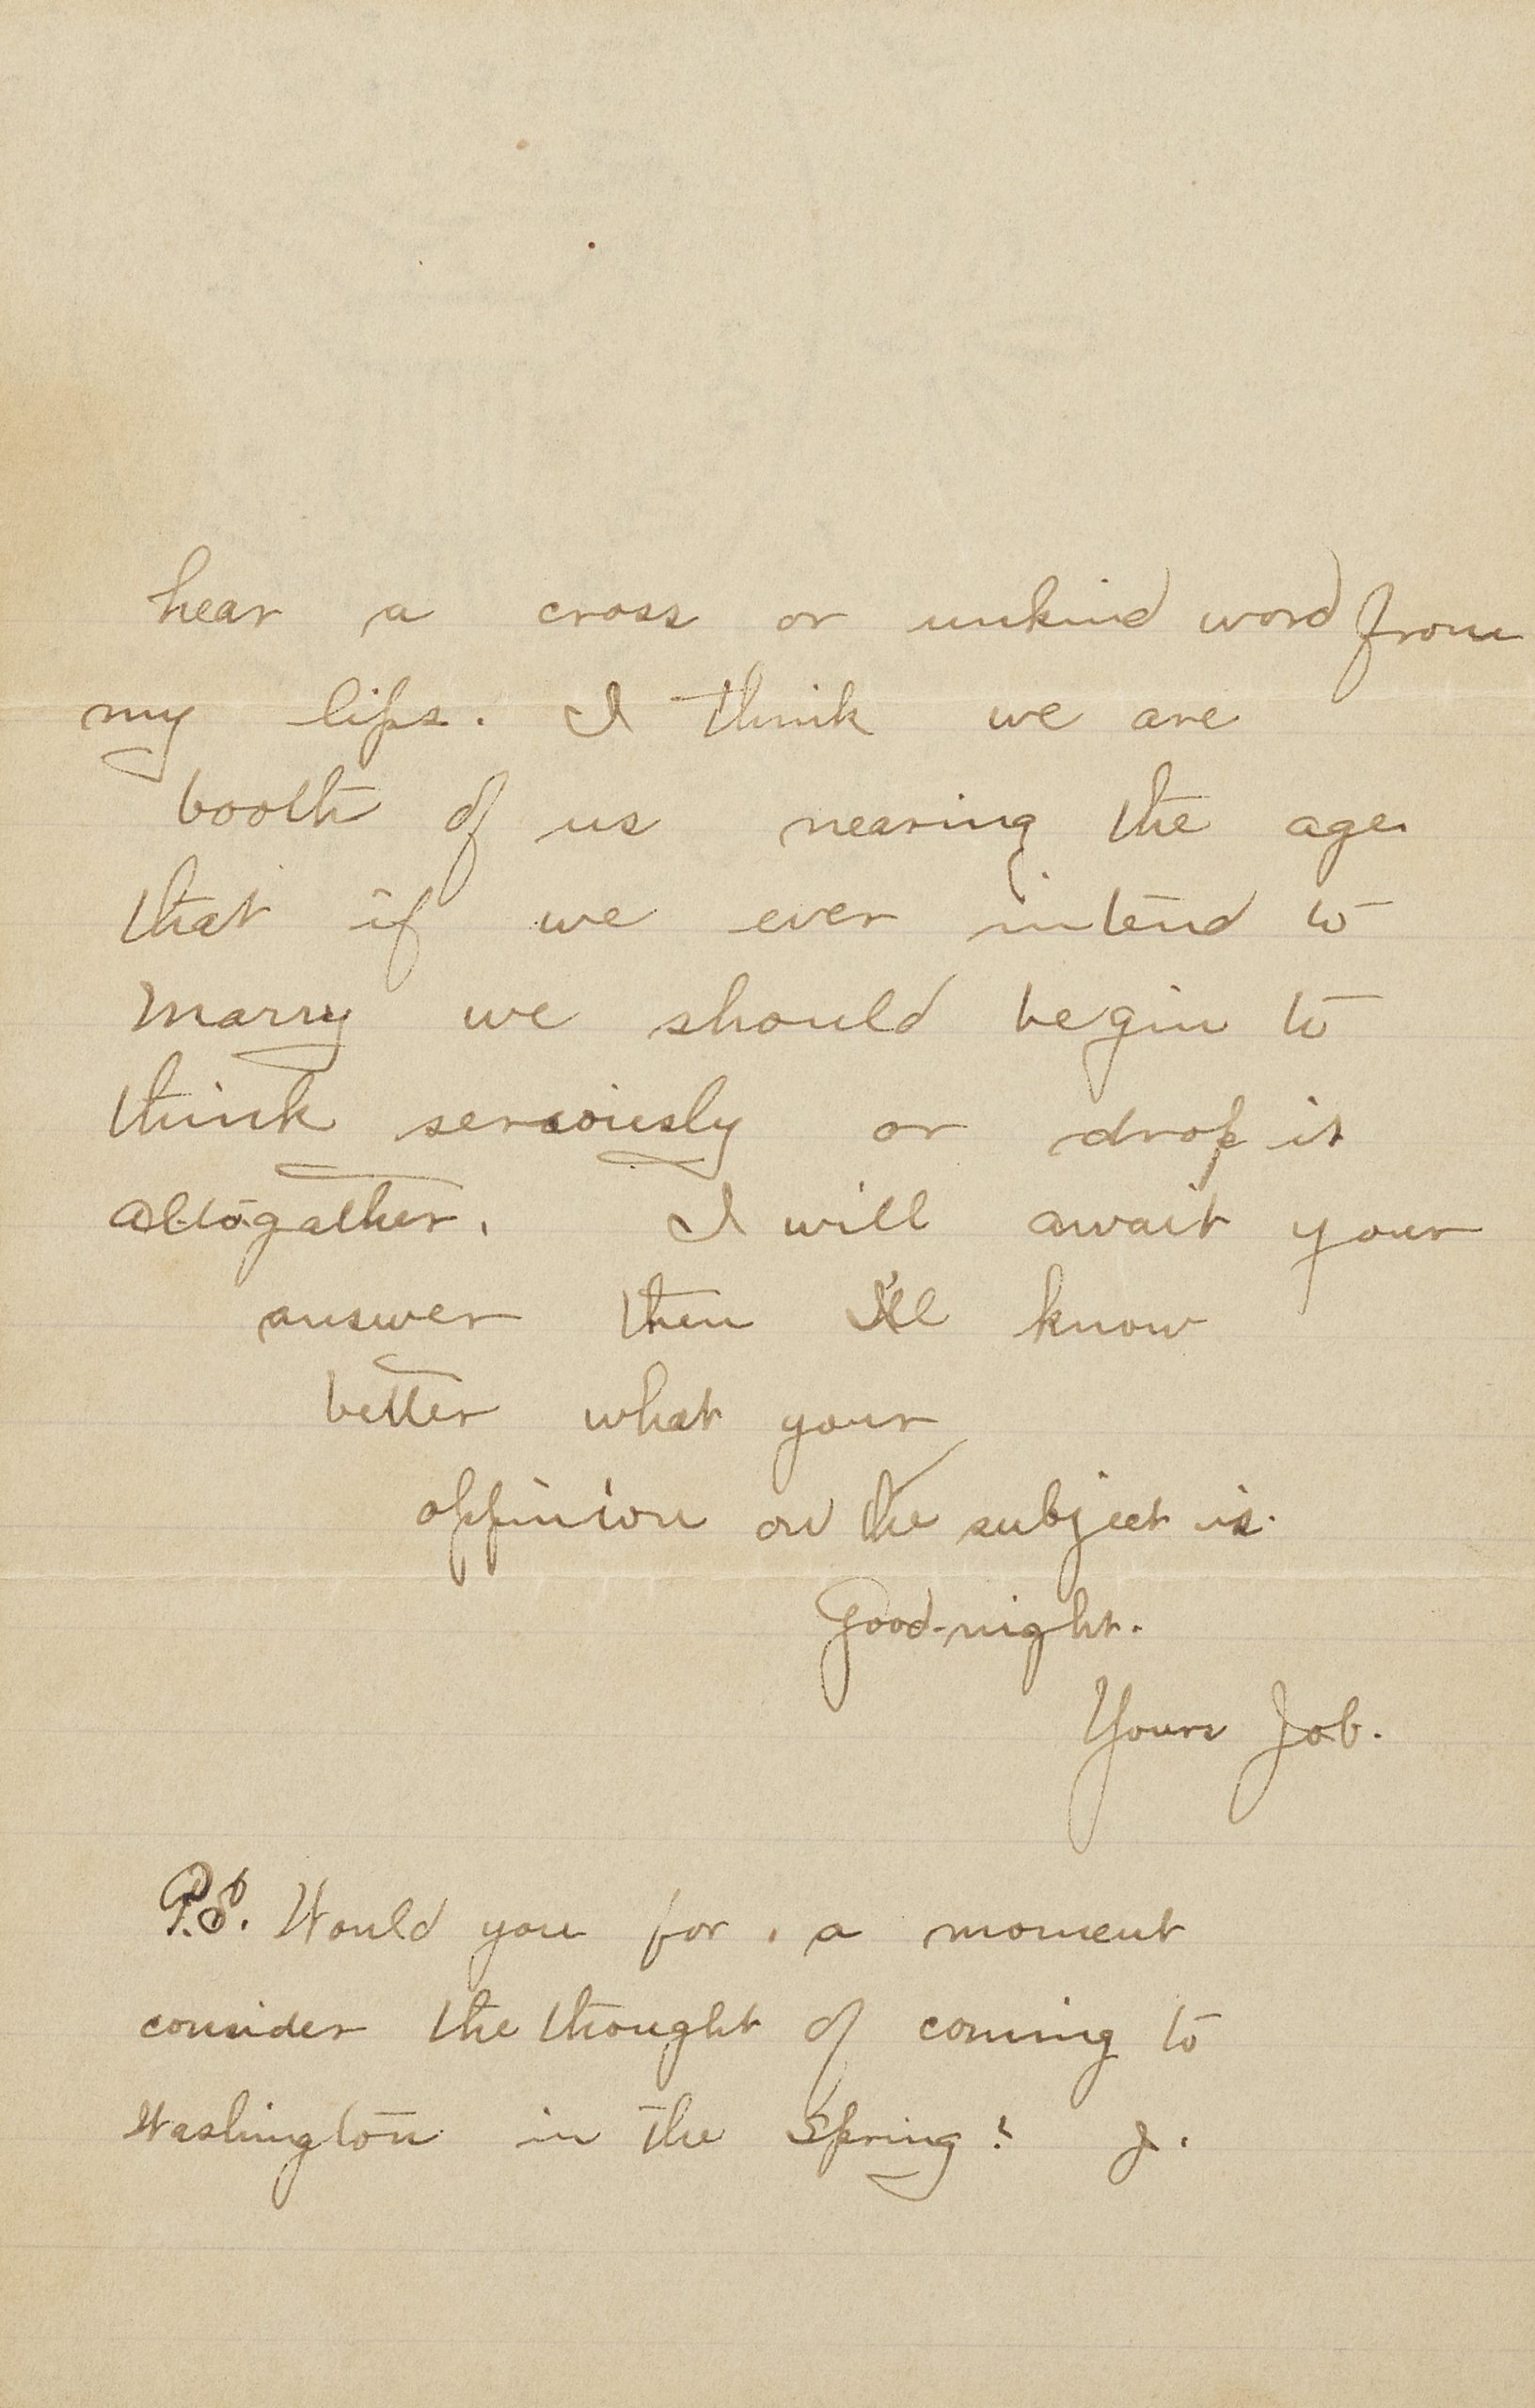 Page 3 of a letter to Daisy Massey written by "Jeb." On this page, Jeb writes about deciding whether to continue their relationship or ending it.